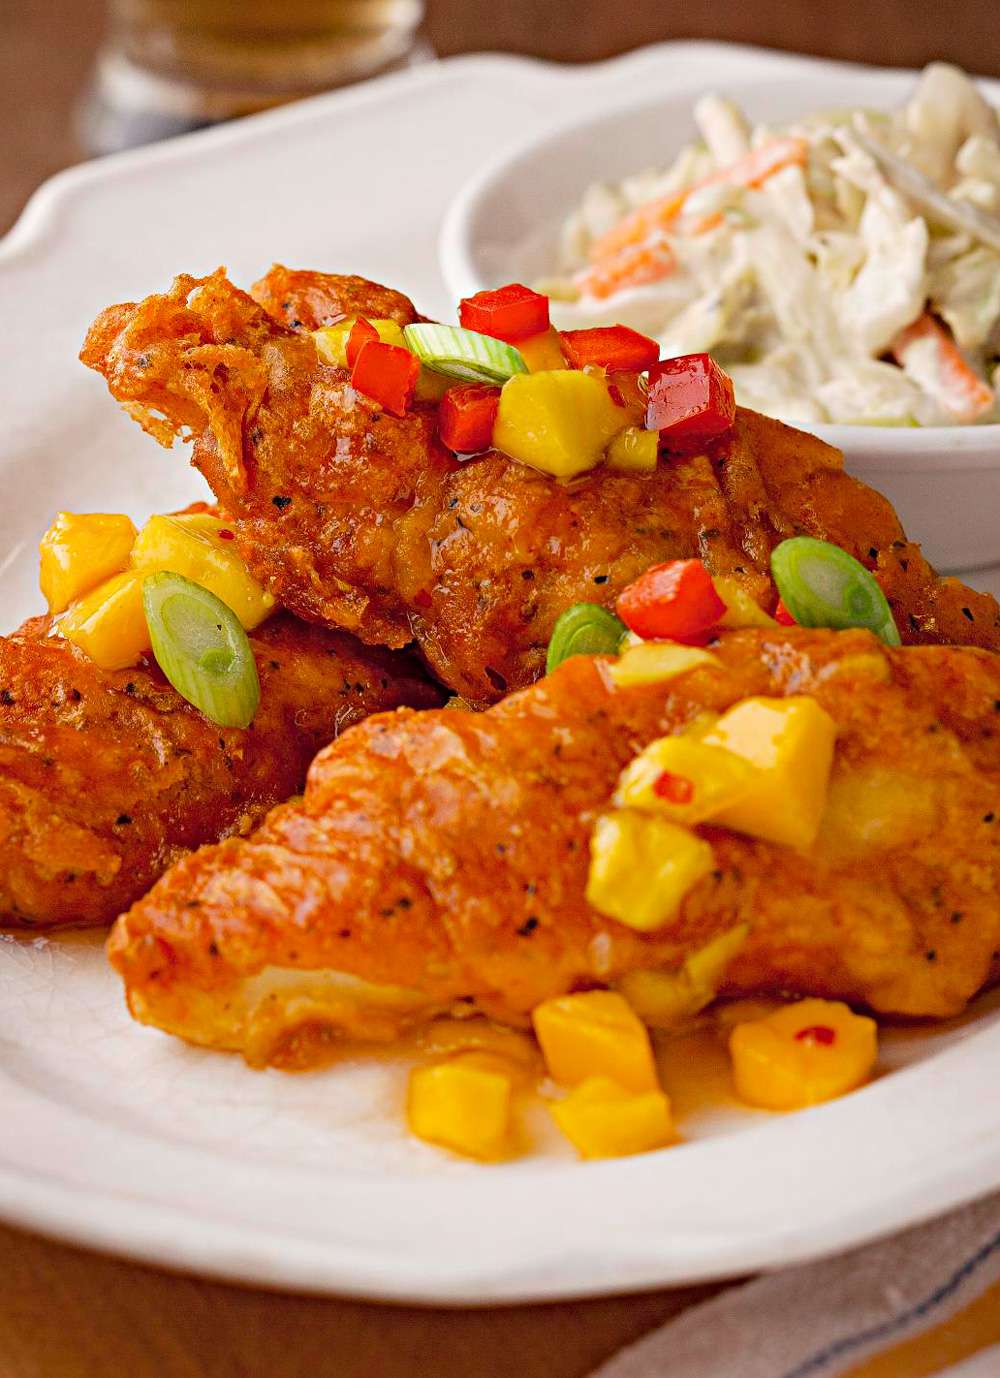 Crispy Beer-Batter-Fried Walleye with Mango Sweet-and-Sour Sauce